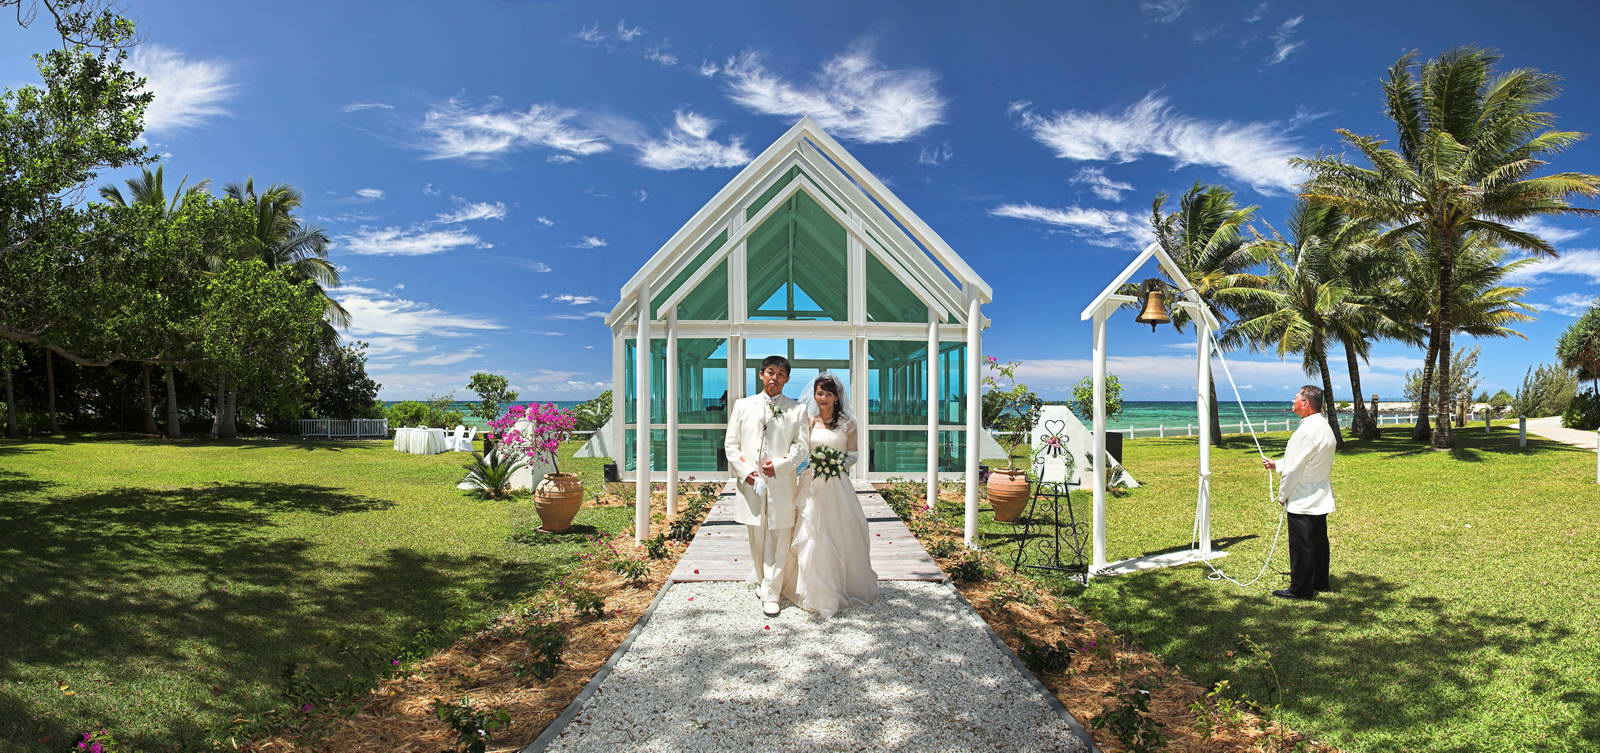 Rocket Guide to New Caledonia Weddings